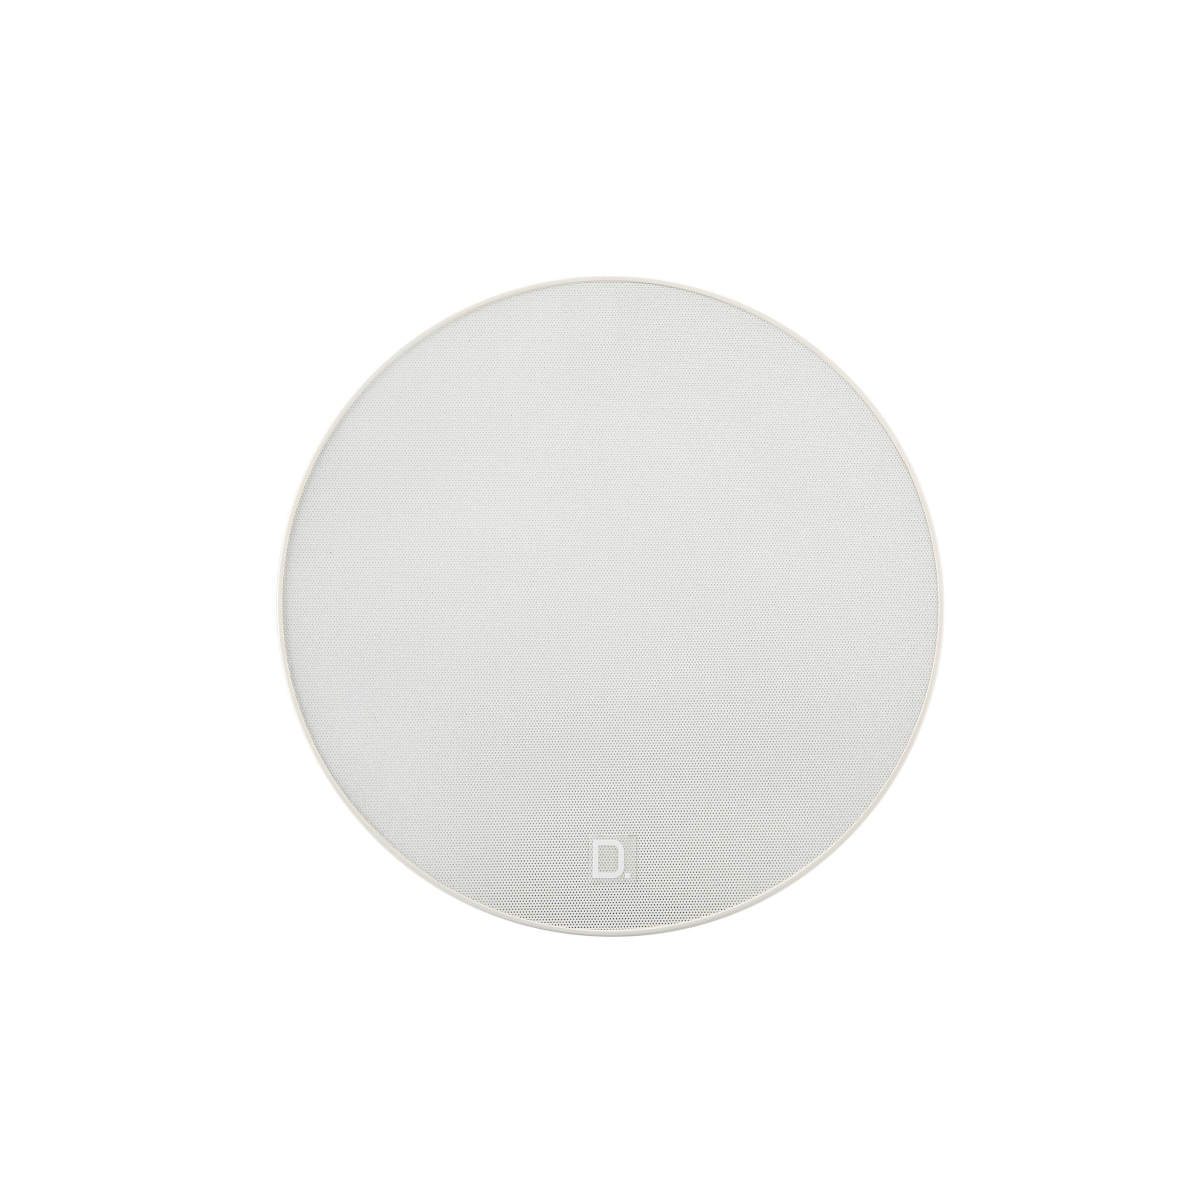 Definitive Technology DT8R Round 8" In-Ceiling Speaker - Ooberpad India